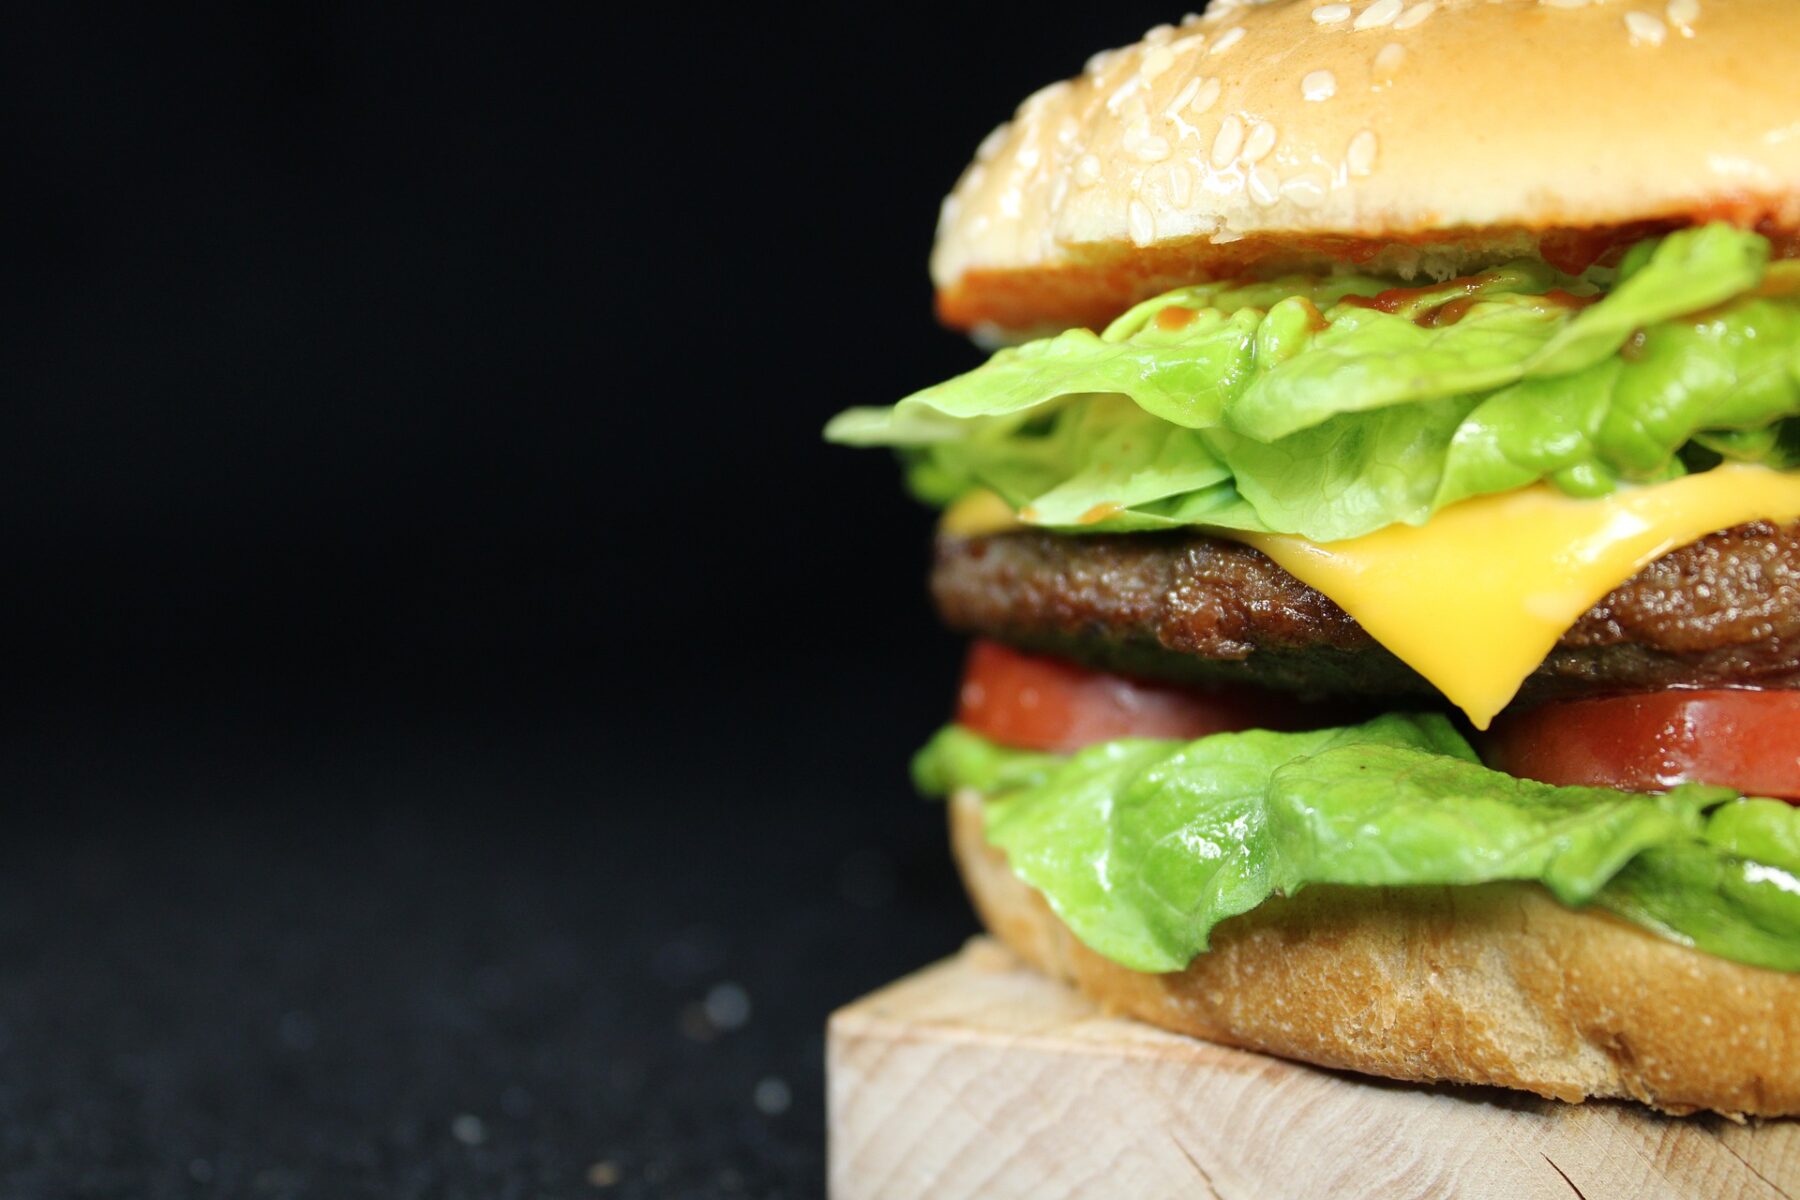 Fast food Burger King offers free cryptocurrencies to purchase food